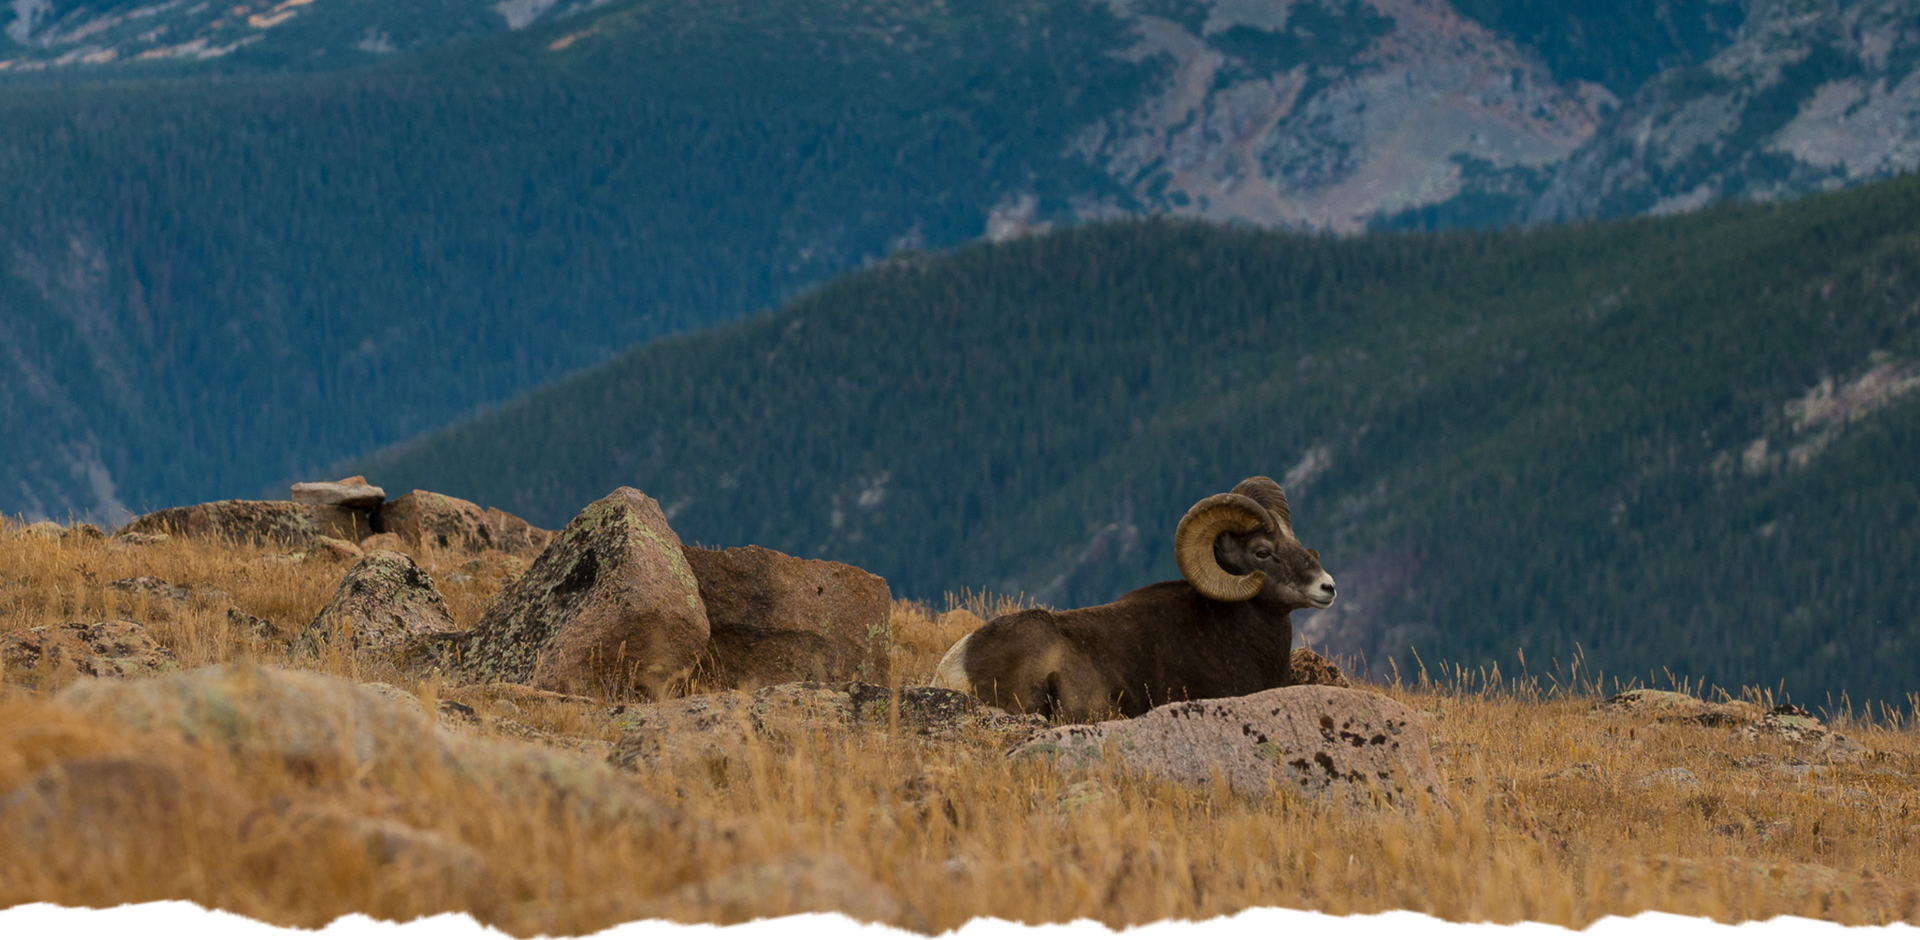 A ram with large horns sitting on a mountainside